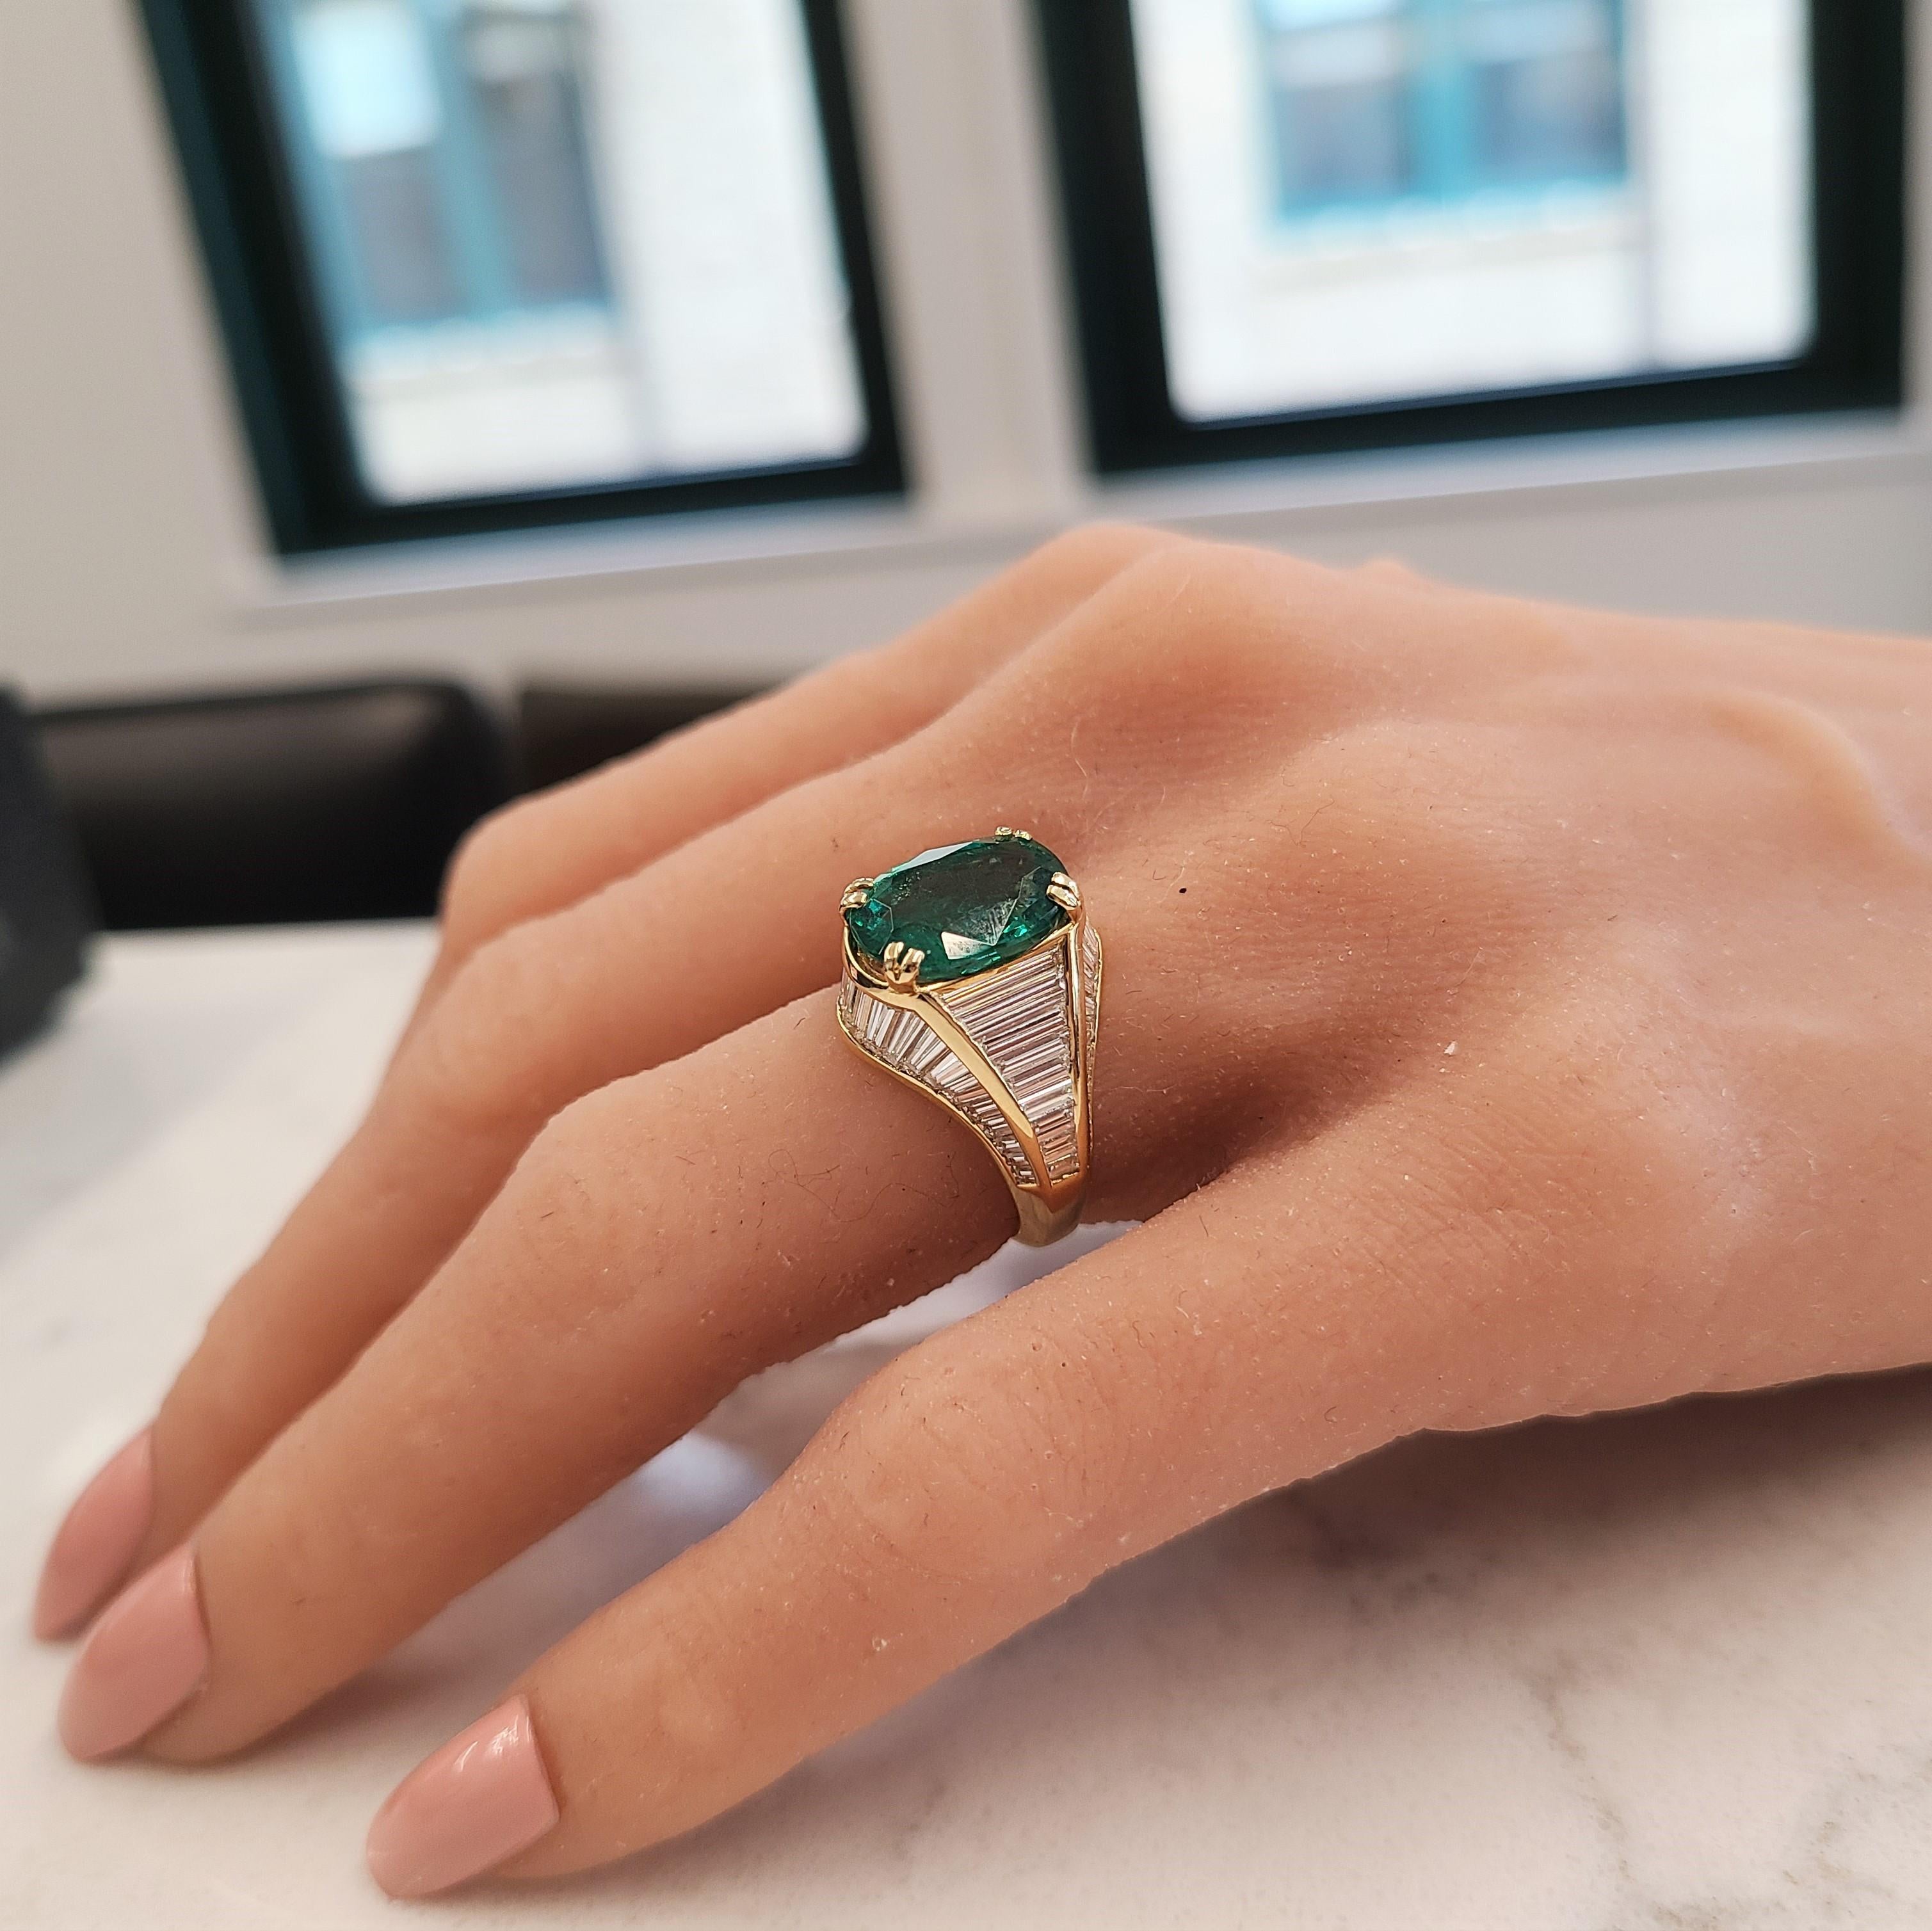 Designed in brightly polished 18 karat yellow gold, this gorgeous emerald and diamond ring features a prong set 4.08 carat emerald in the center that exhibits a deep green hue and is accompanied by an IGITL certification upon purchase. This emerald